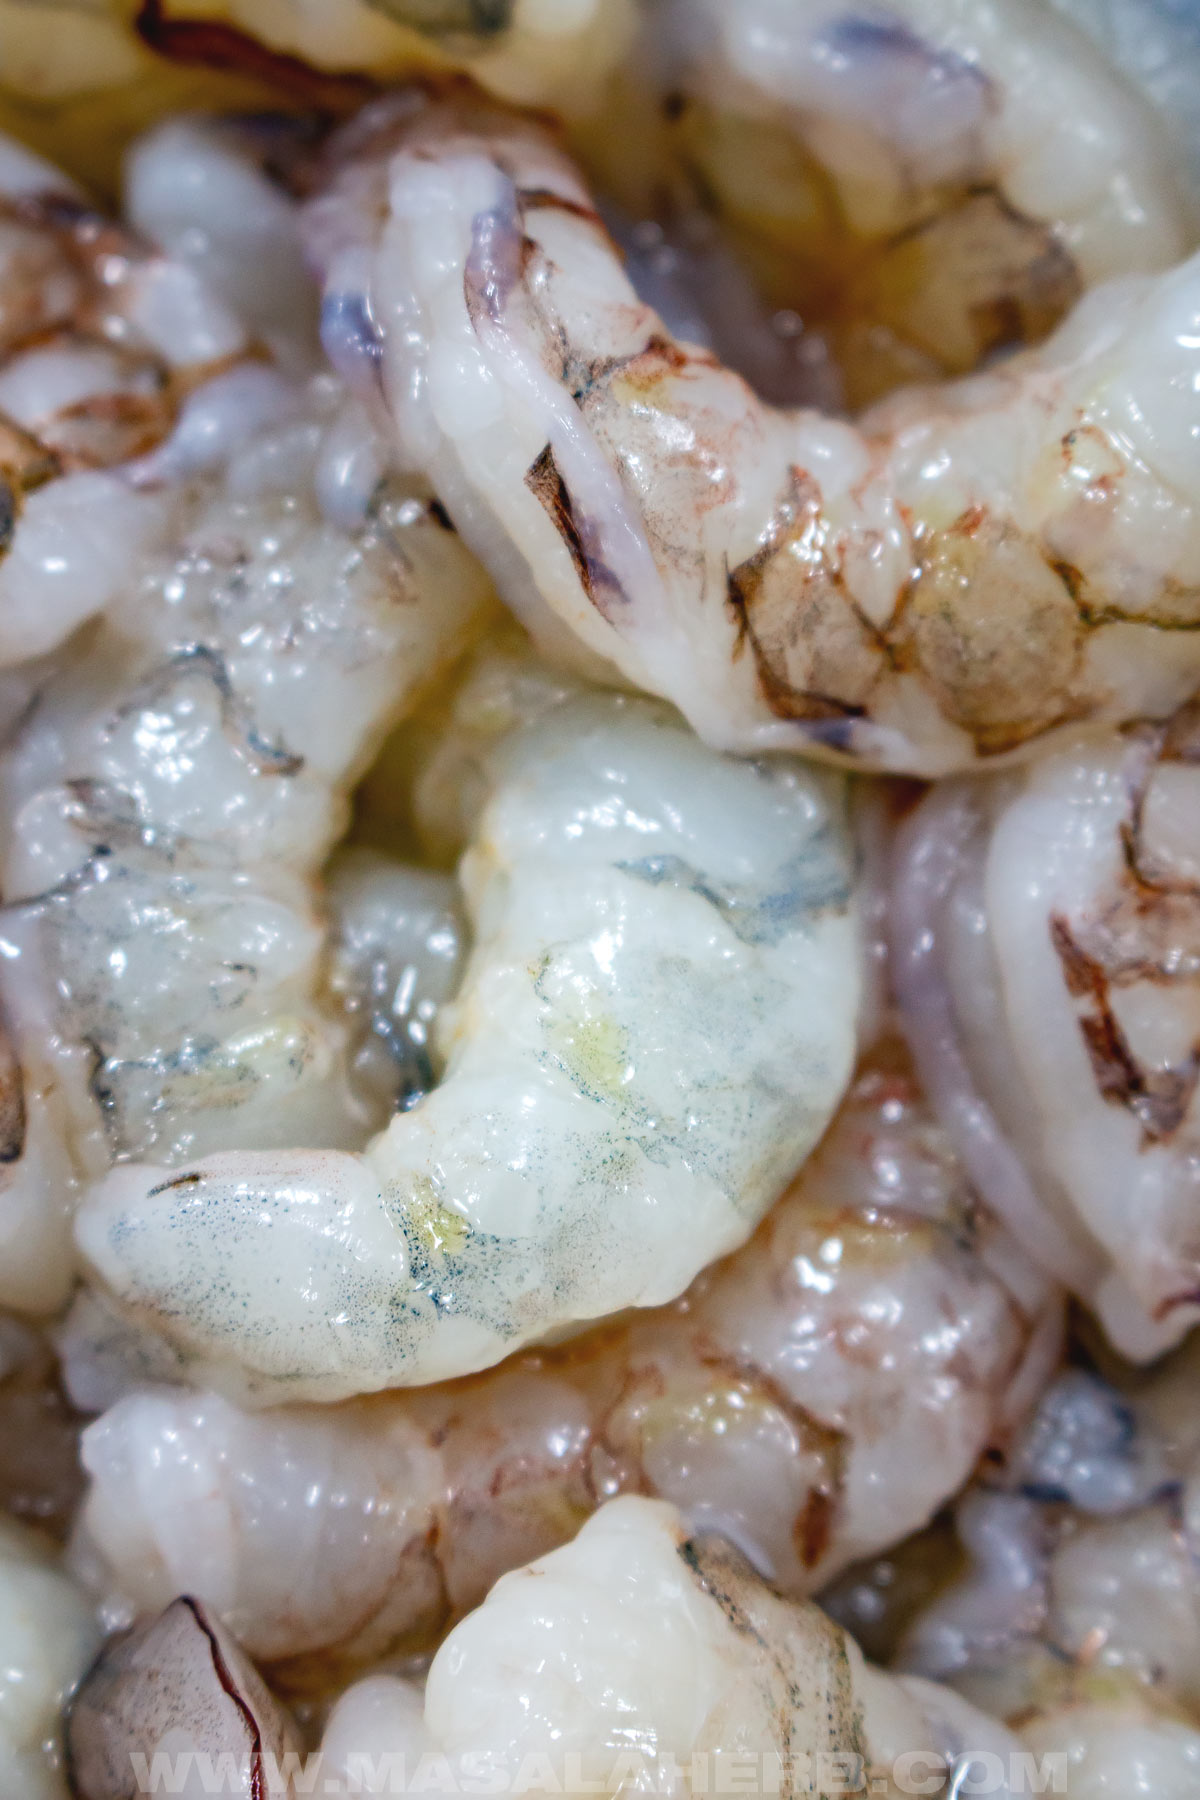 cleaned, deshelled and deveined shrimp close up